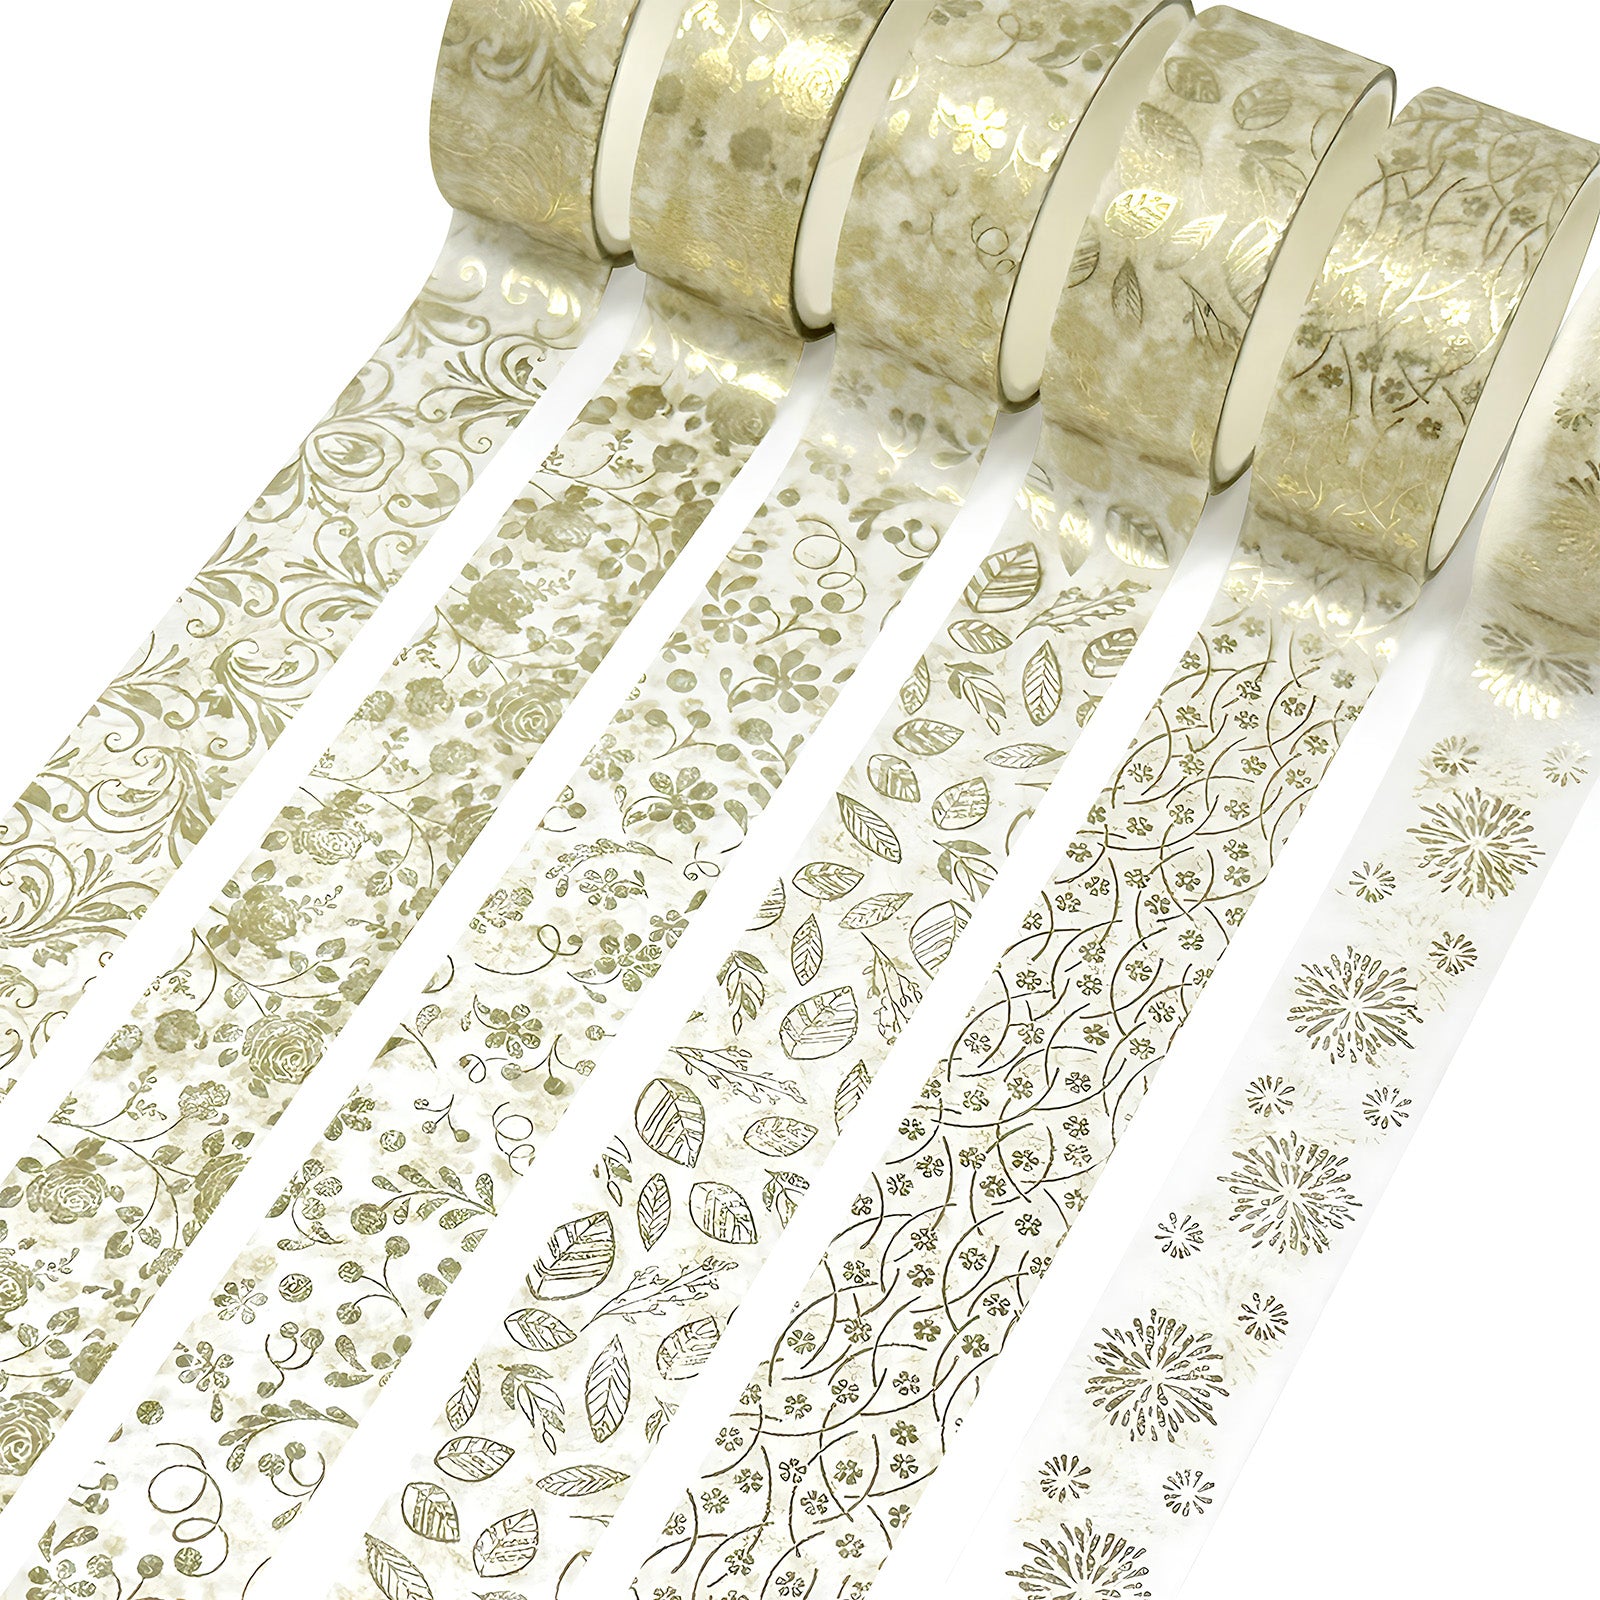 Wrapables Nature Metallic Foil Washi Tape Set for Scrapbooking, (6